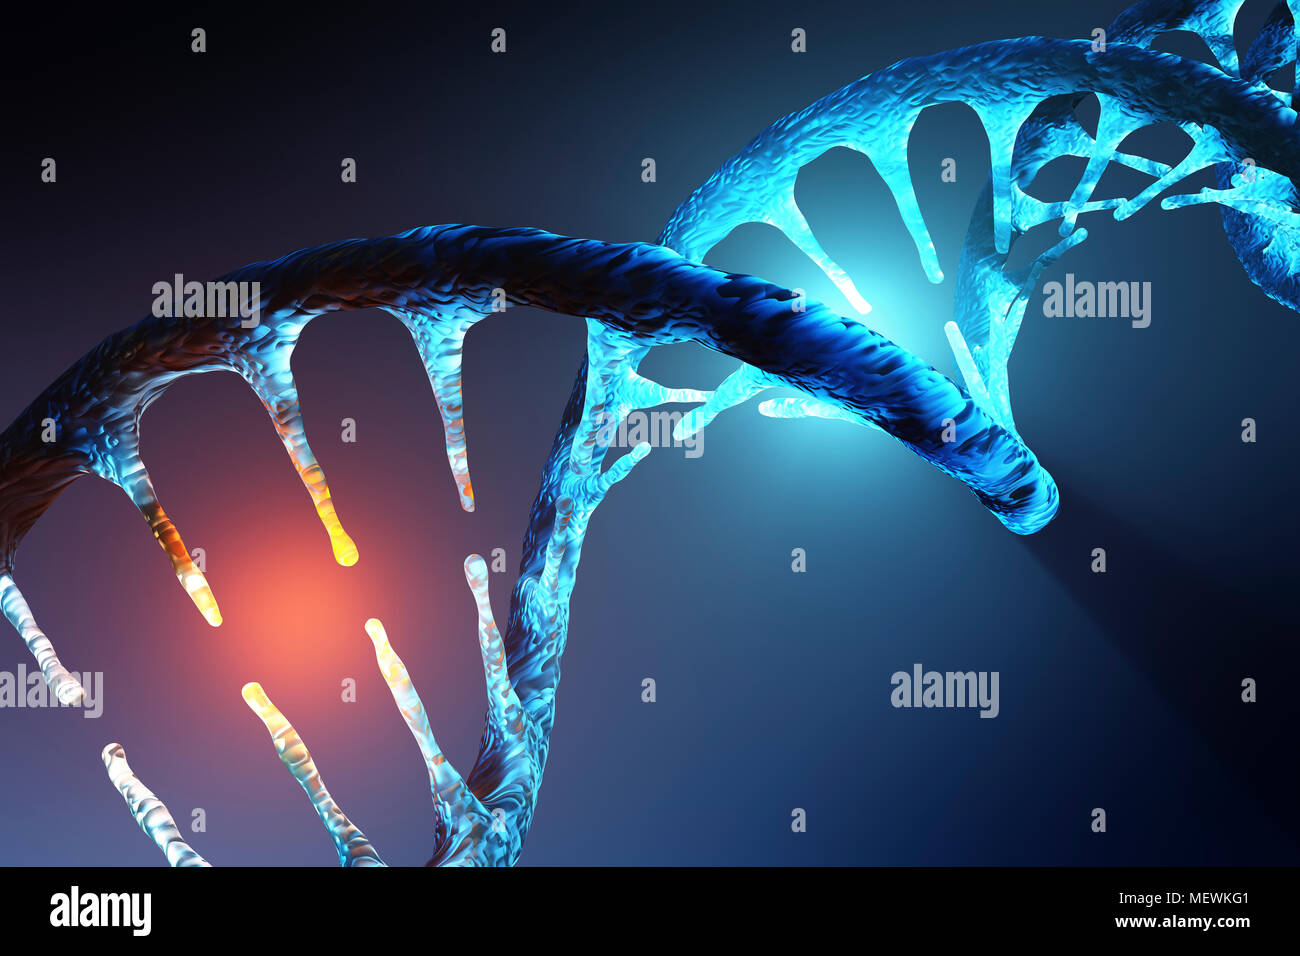 Conceptual image of human DNA illustrating targeted alteration, manipulation or modification. 3D rendering artwork Stock Photo